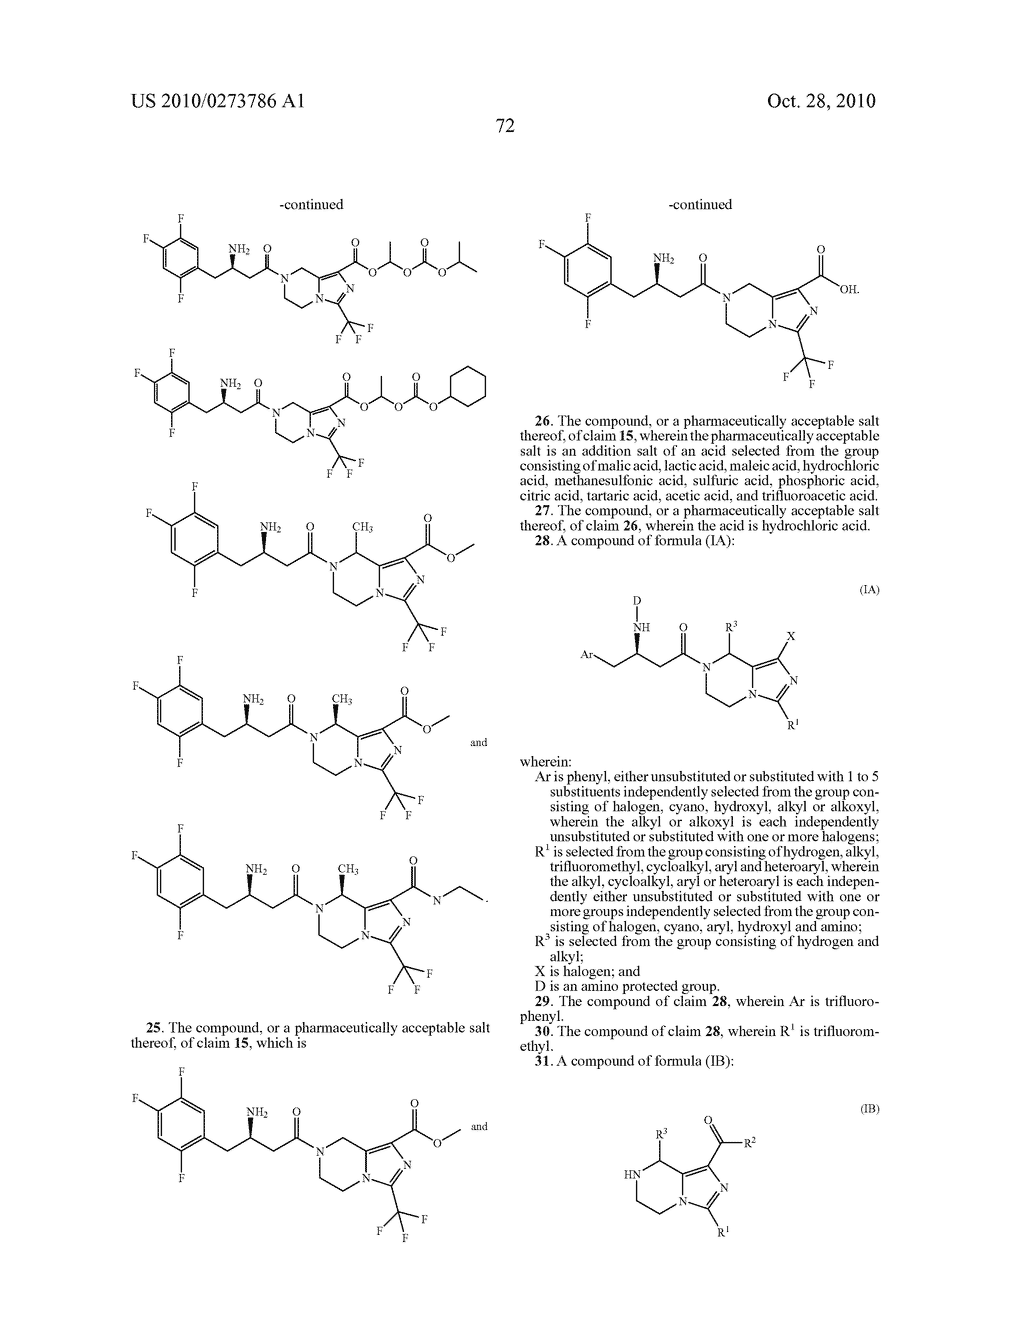 TETRAHYDRO-IMIDAZ0[1,5-A]PYRAZINE DERIVATIVES, PREPARATION PROCESS AND MEDICINAL USE THEREOF - diagram, schematic, and image 73